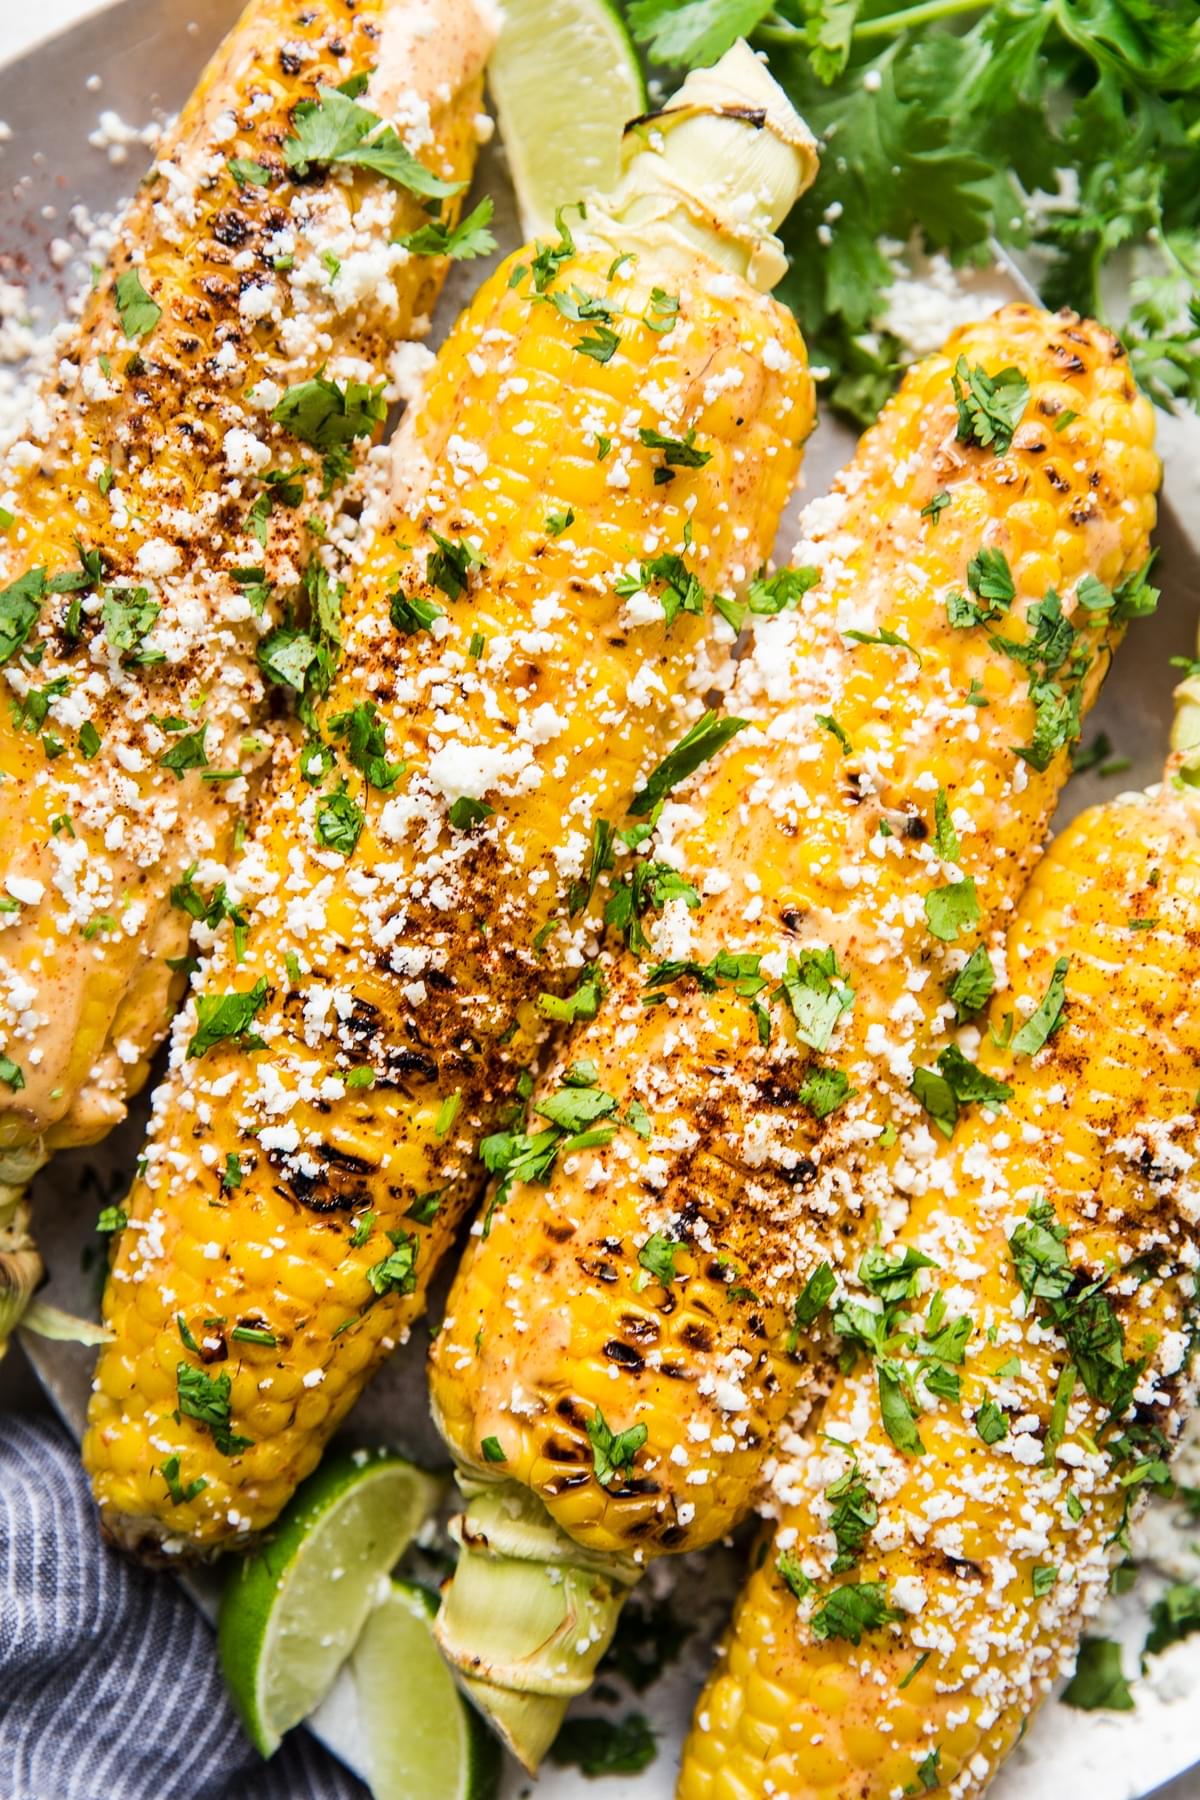 4 Elote Mexican Street Corn cobs on a plate topped with fresh cilantro, chipotle mayonnaise, cortina cheese and limes